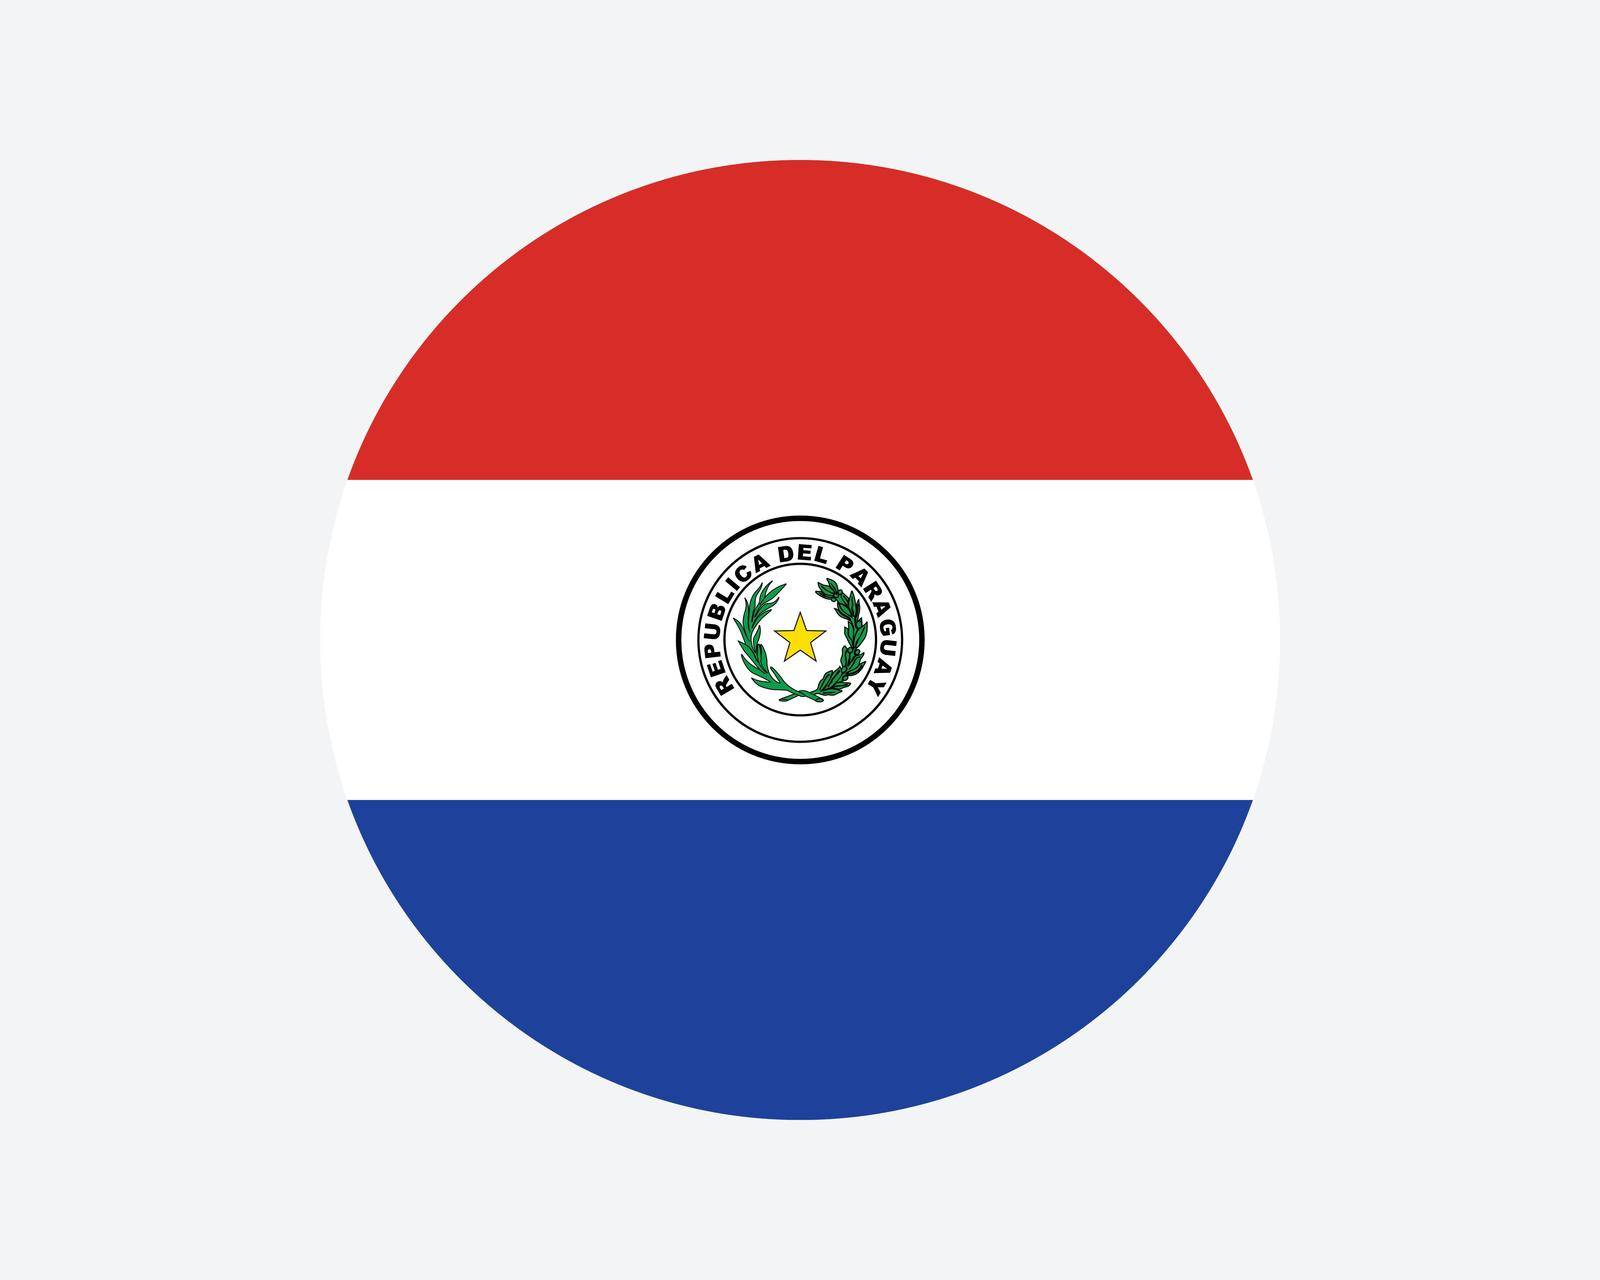 Paraguay Round Country Flag. Paraguayan Circle National Flag. Republic of Paraguay Circular Shape Button Banner. EPS Vector Illustration.